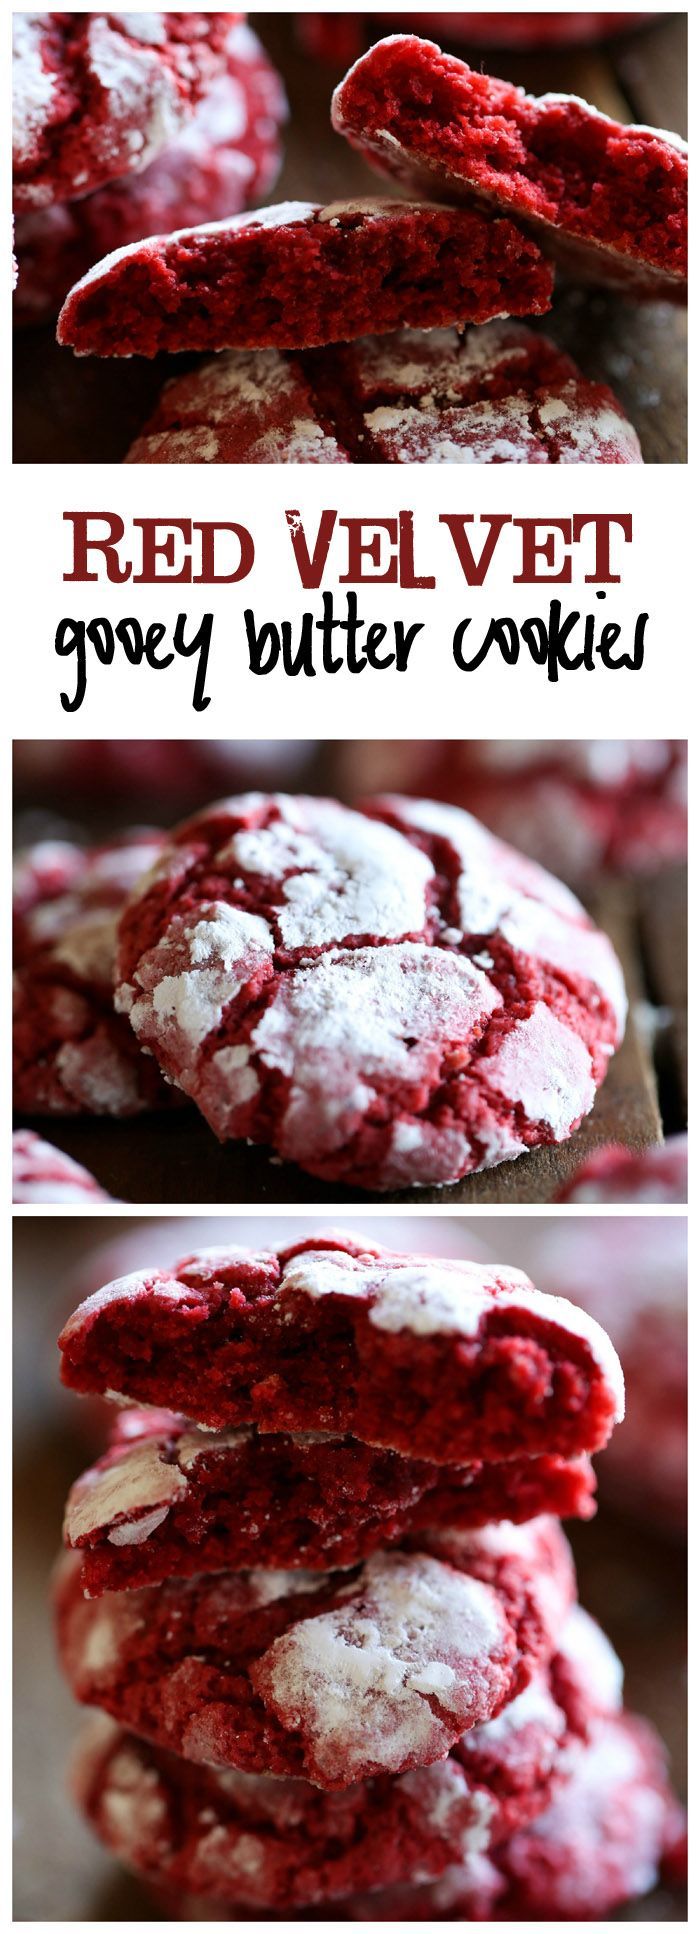 Red Velvet Gooey Butter Cookies… these cookies are so soft and the flavor is delicious! A perfect holiday treat!